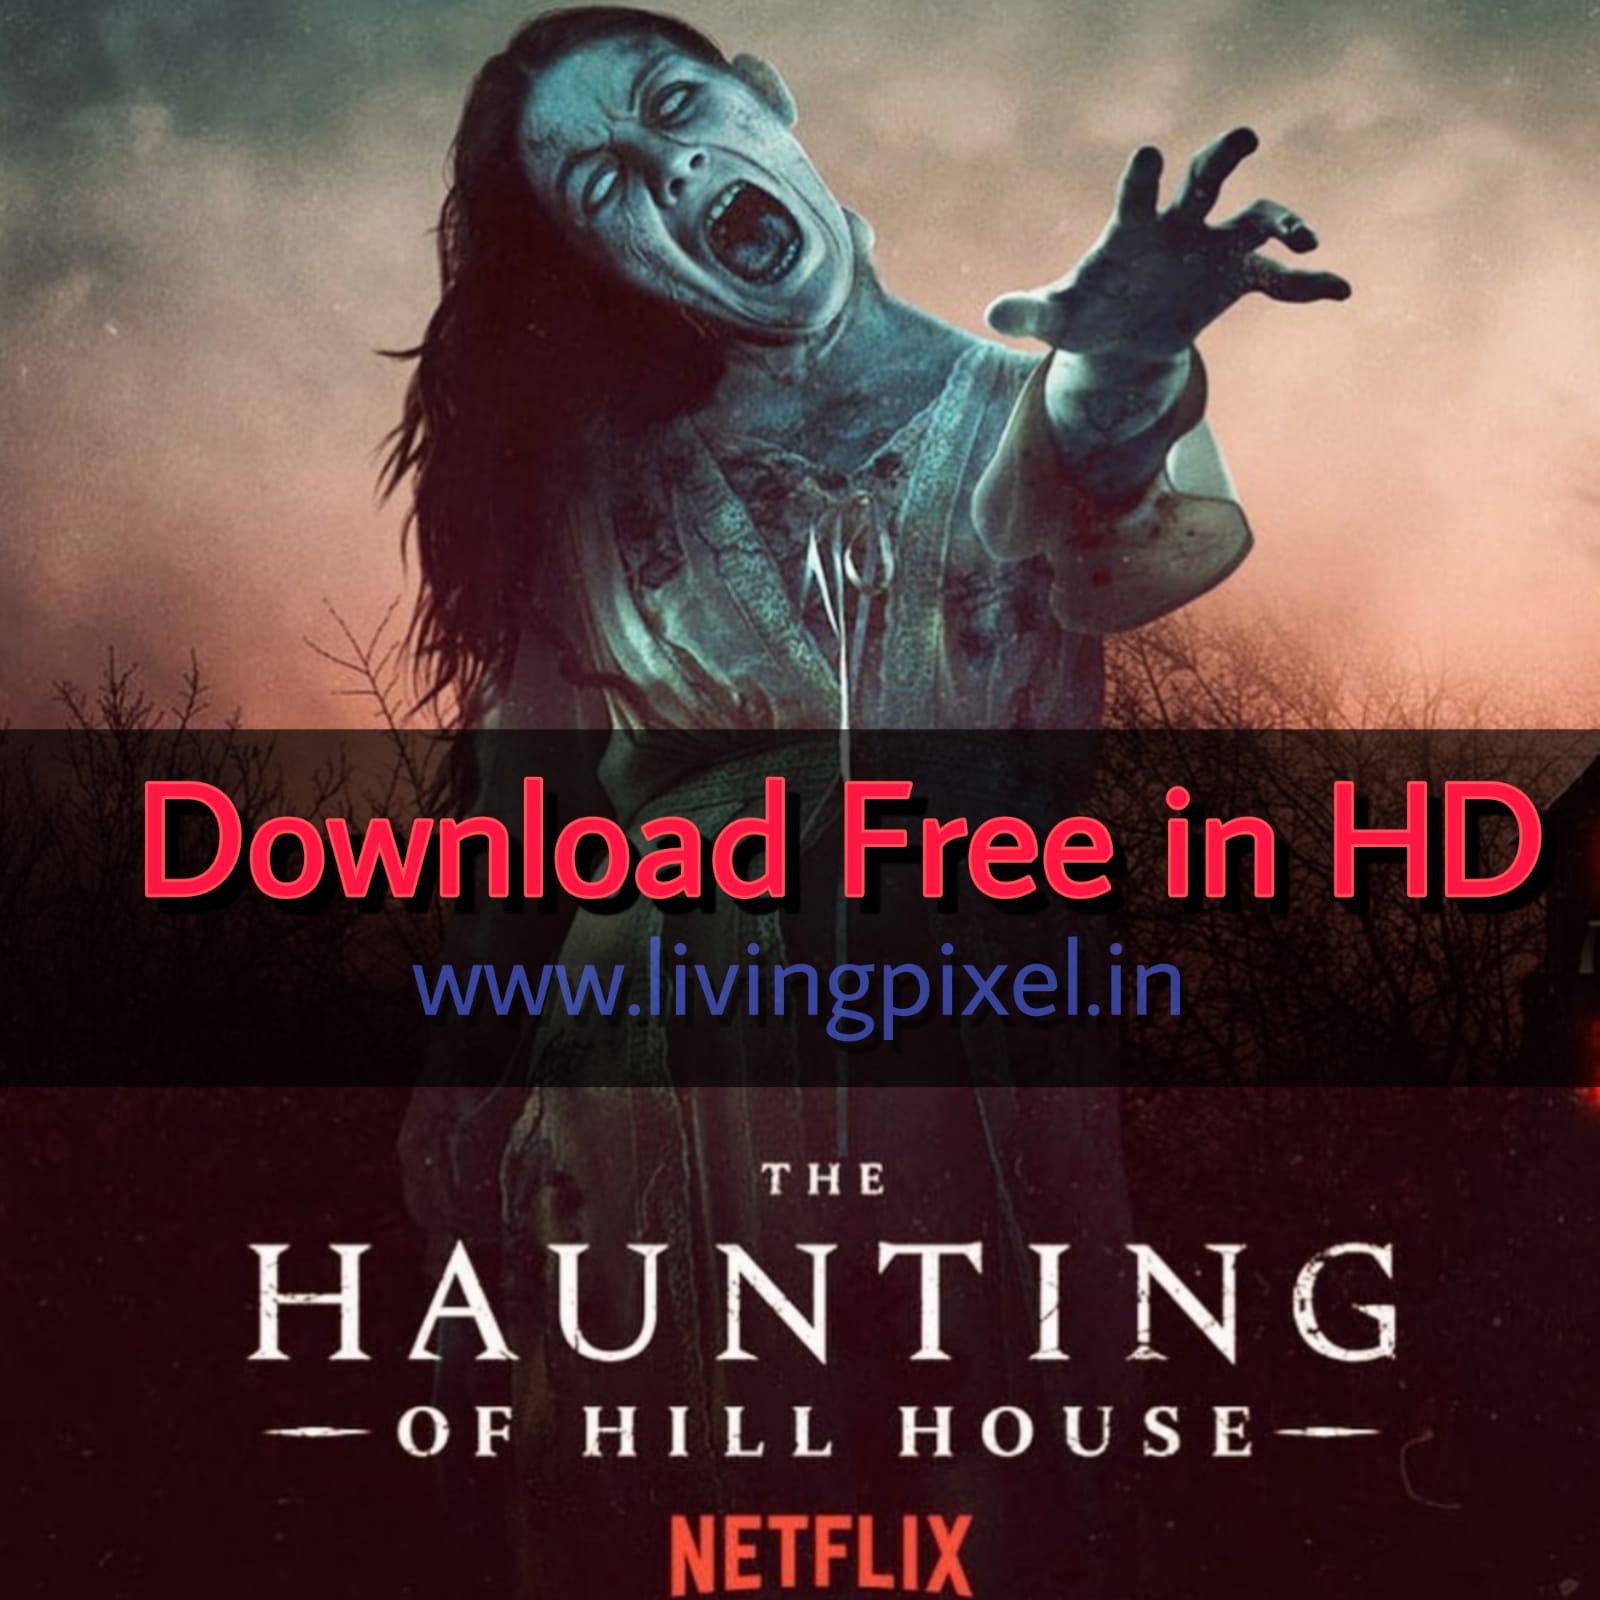 The Haunting of Hill House in hindi download filmywap lp thumbnail